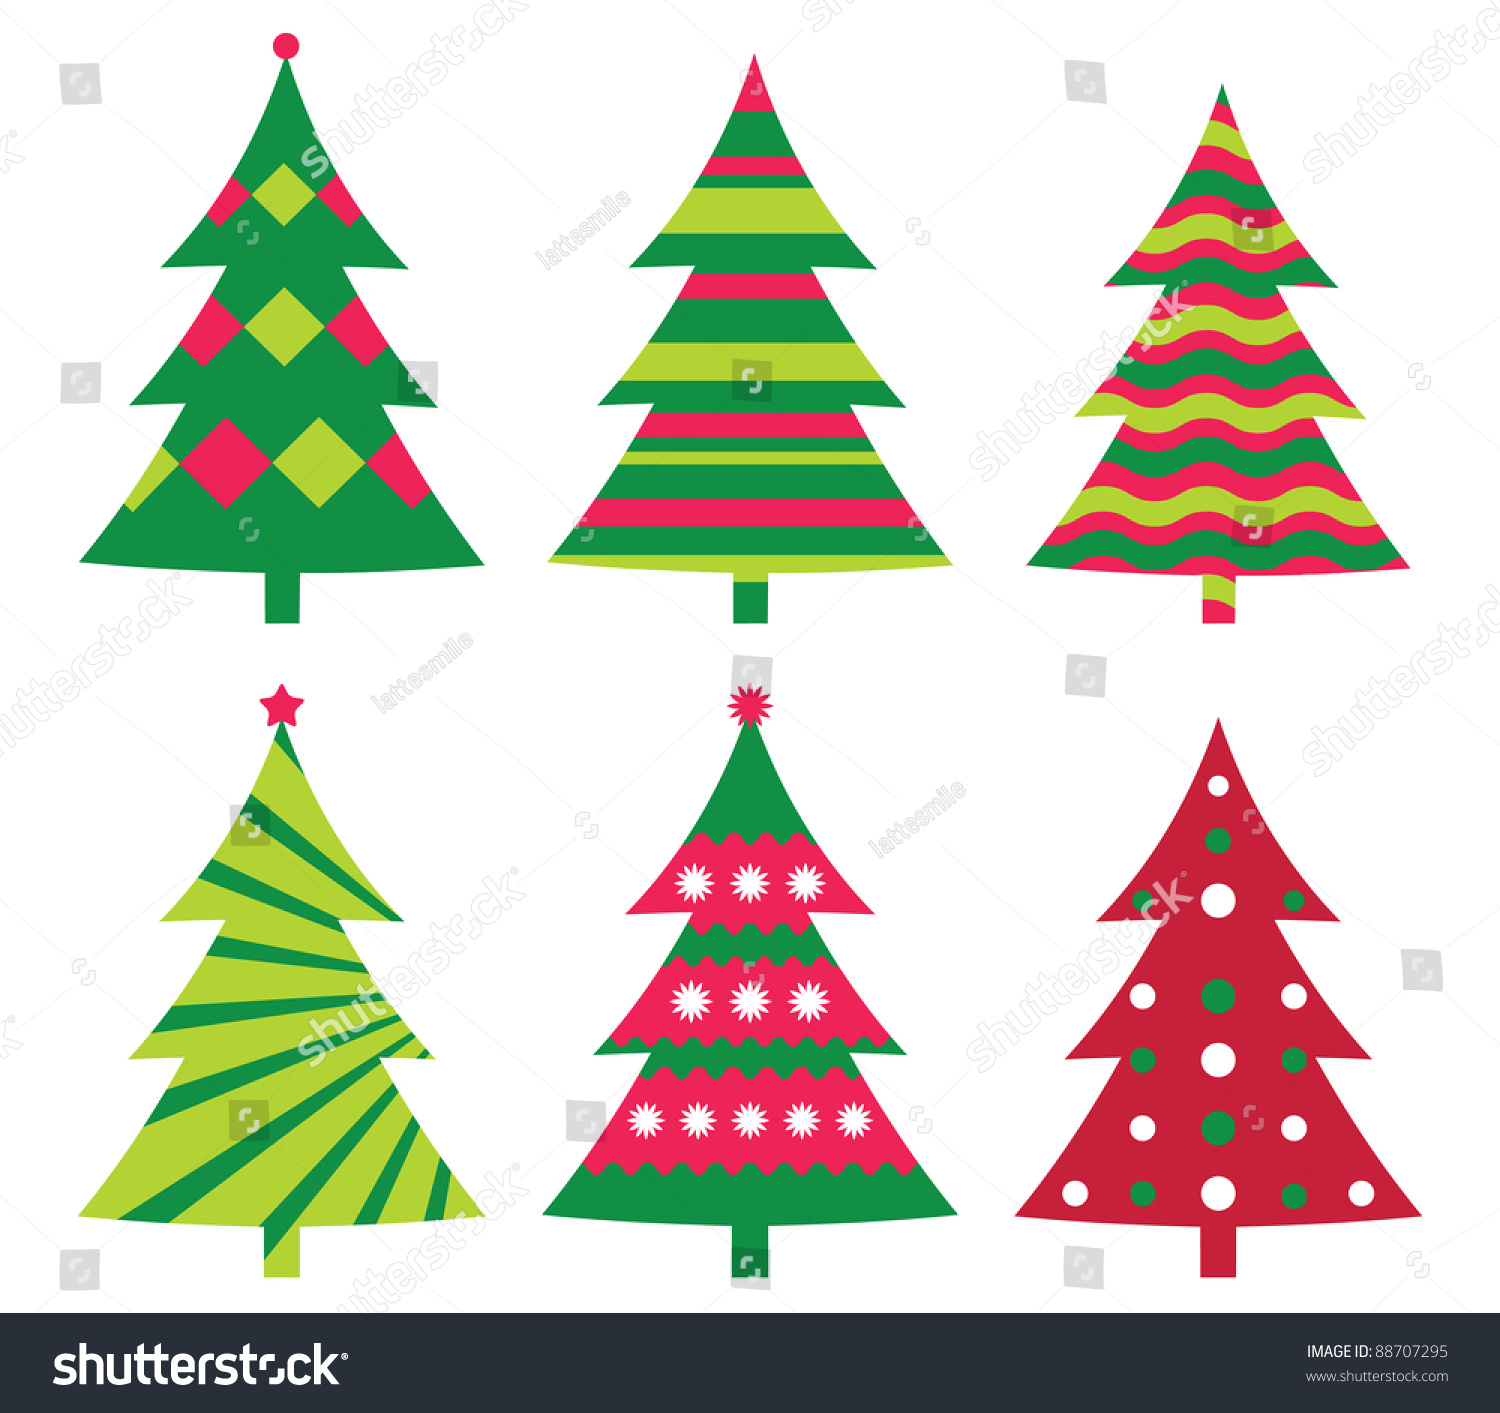 Christmas Trees Vector Collection - 88707295 : Shutterstock